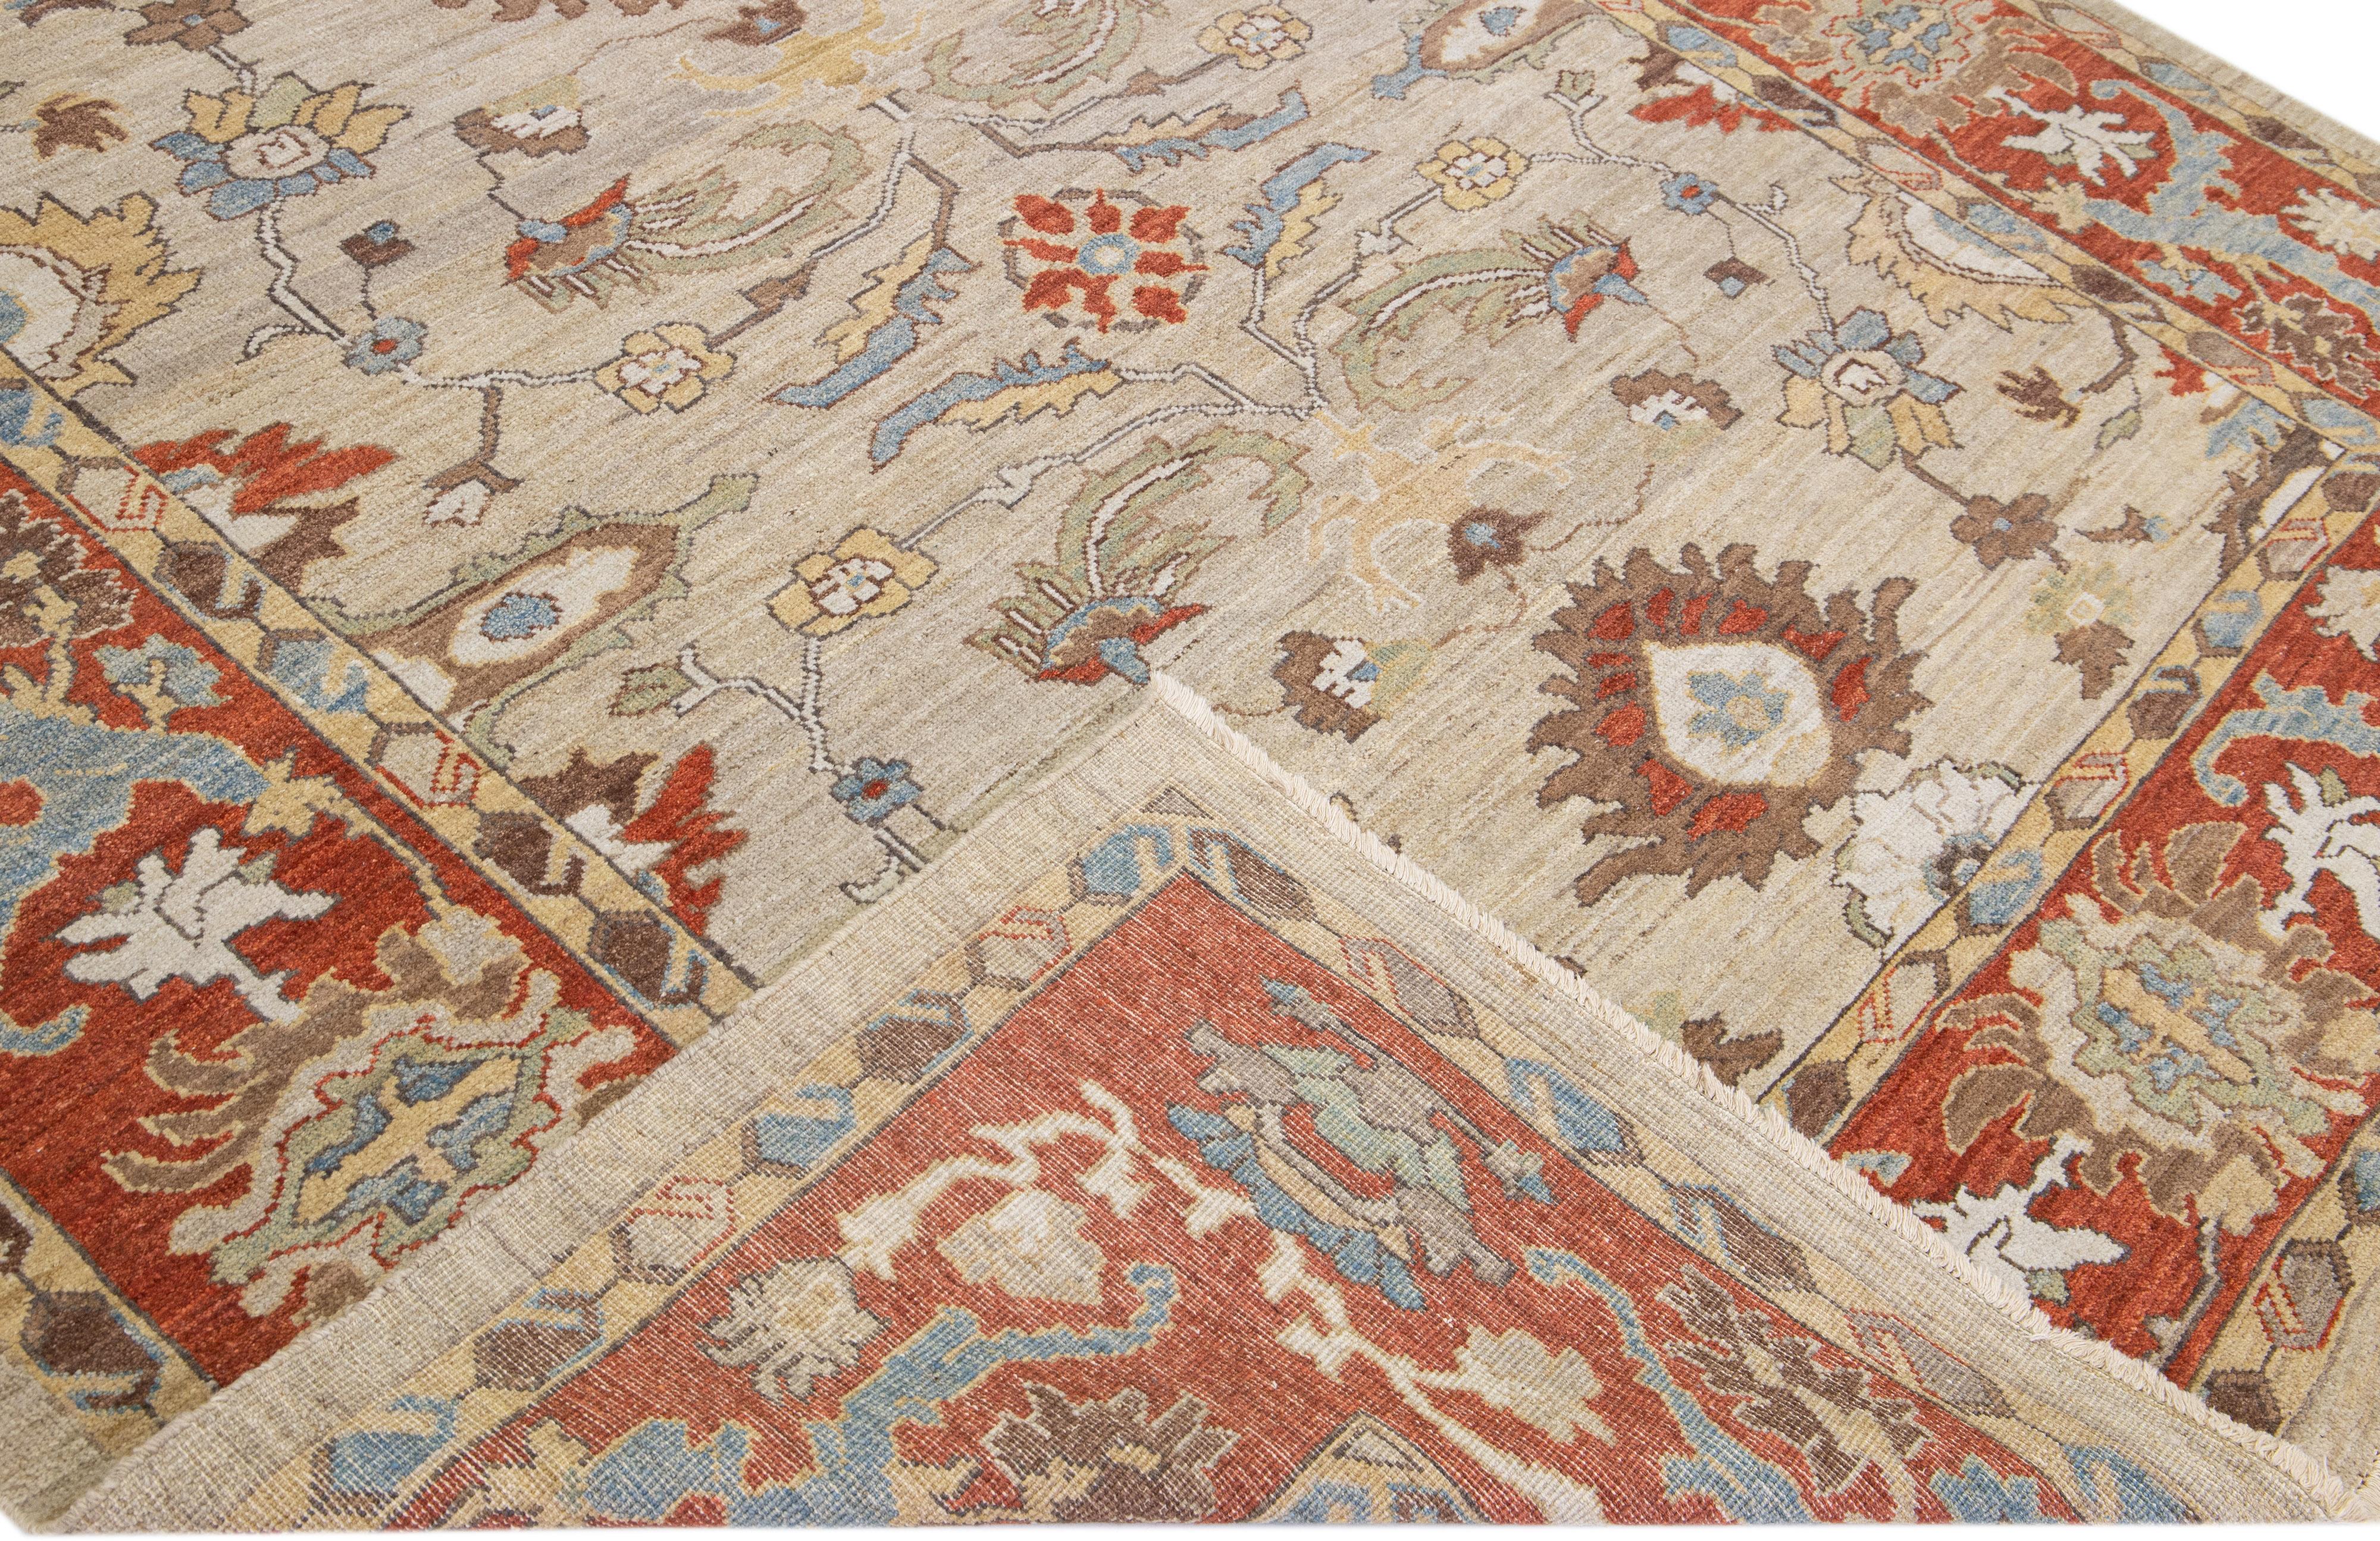 Beautiful modern Sultanabad hand-knotted wool rug with a brown field. This Sultanabad rug has a rusted-designed frame with multicolor accents in a gorgeous all-over classic floral pattern design.

This rug measures: 8'1